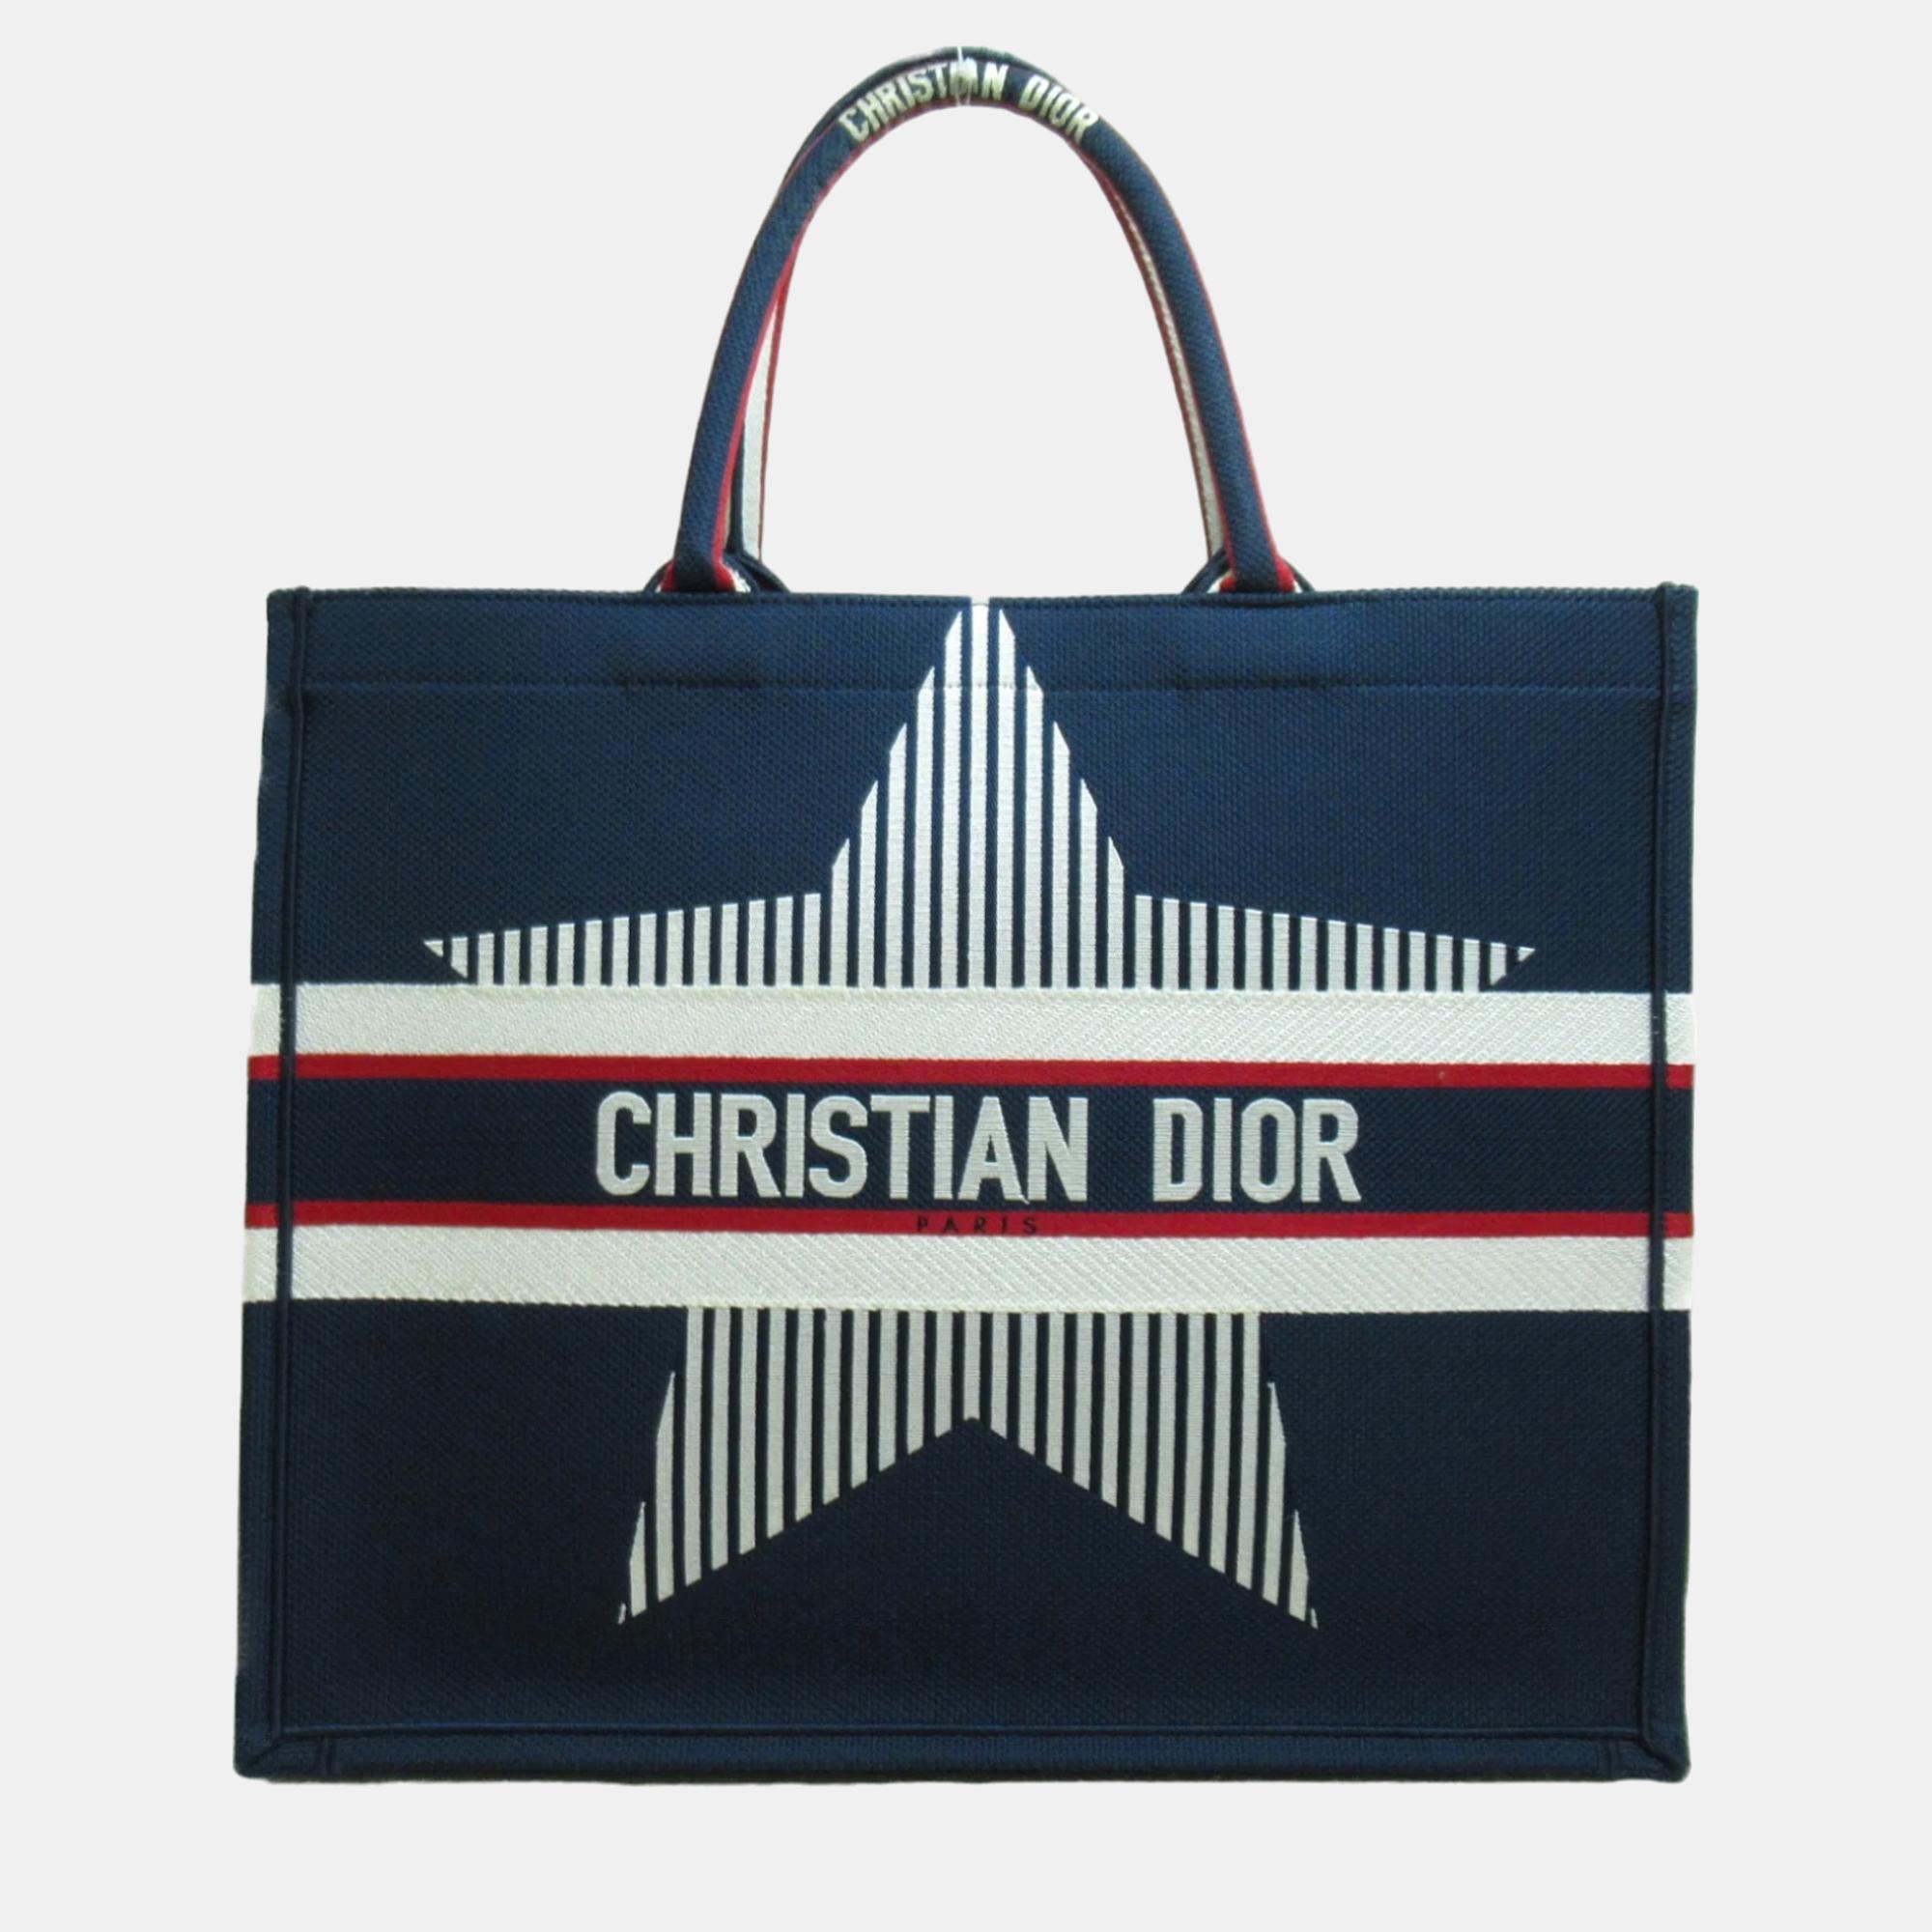 Dior blue canvas large book tote bag